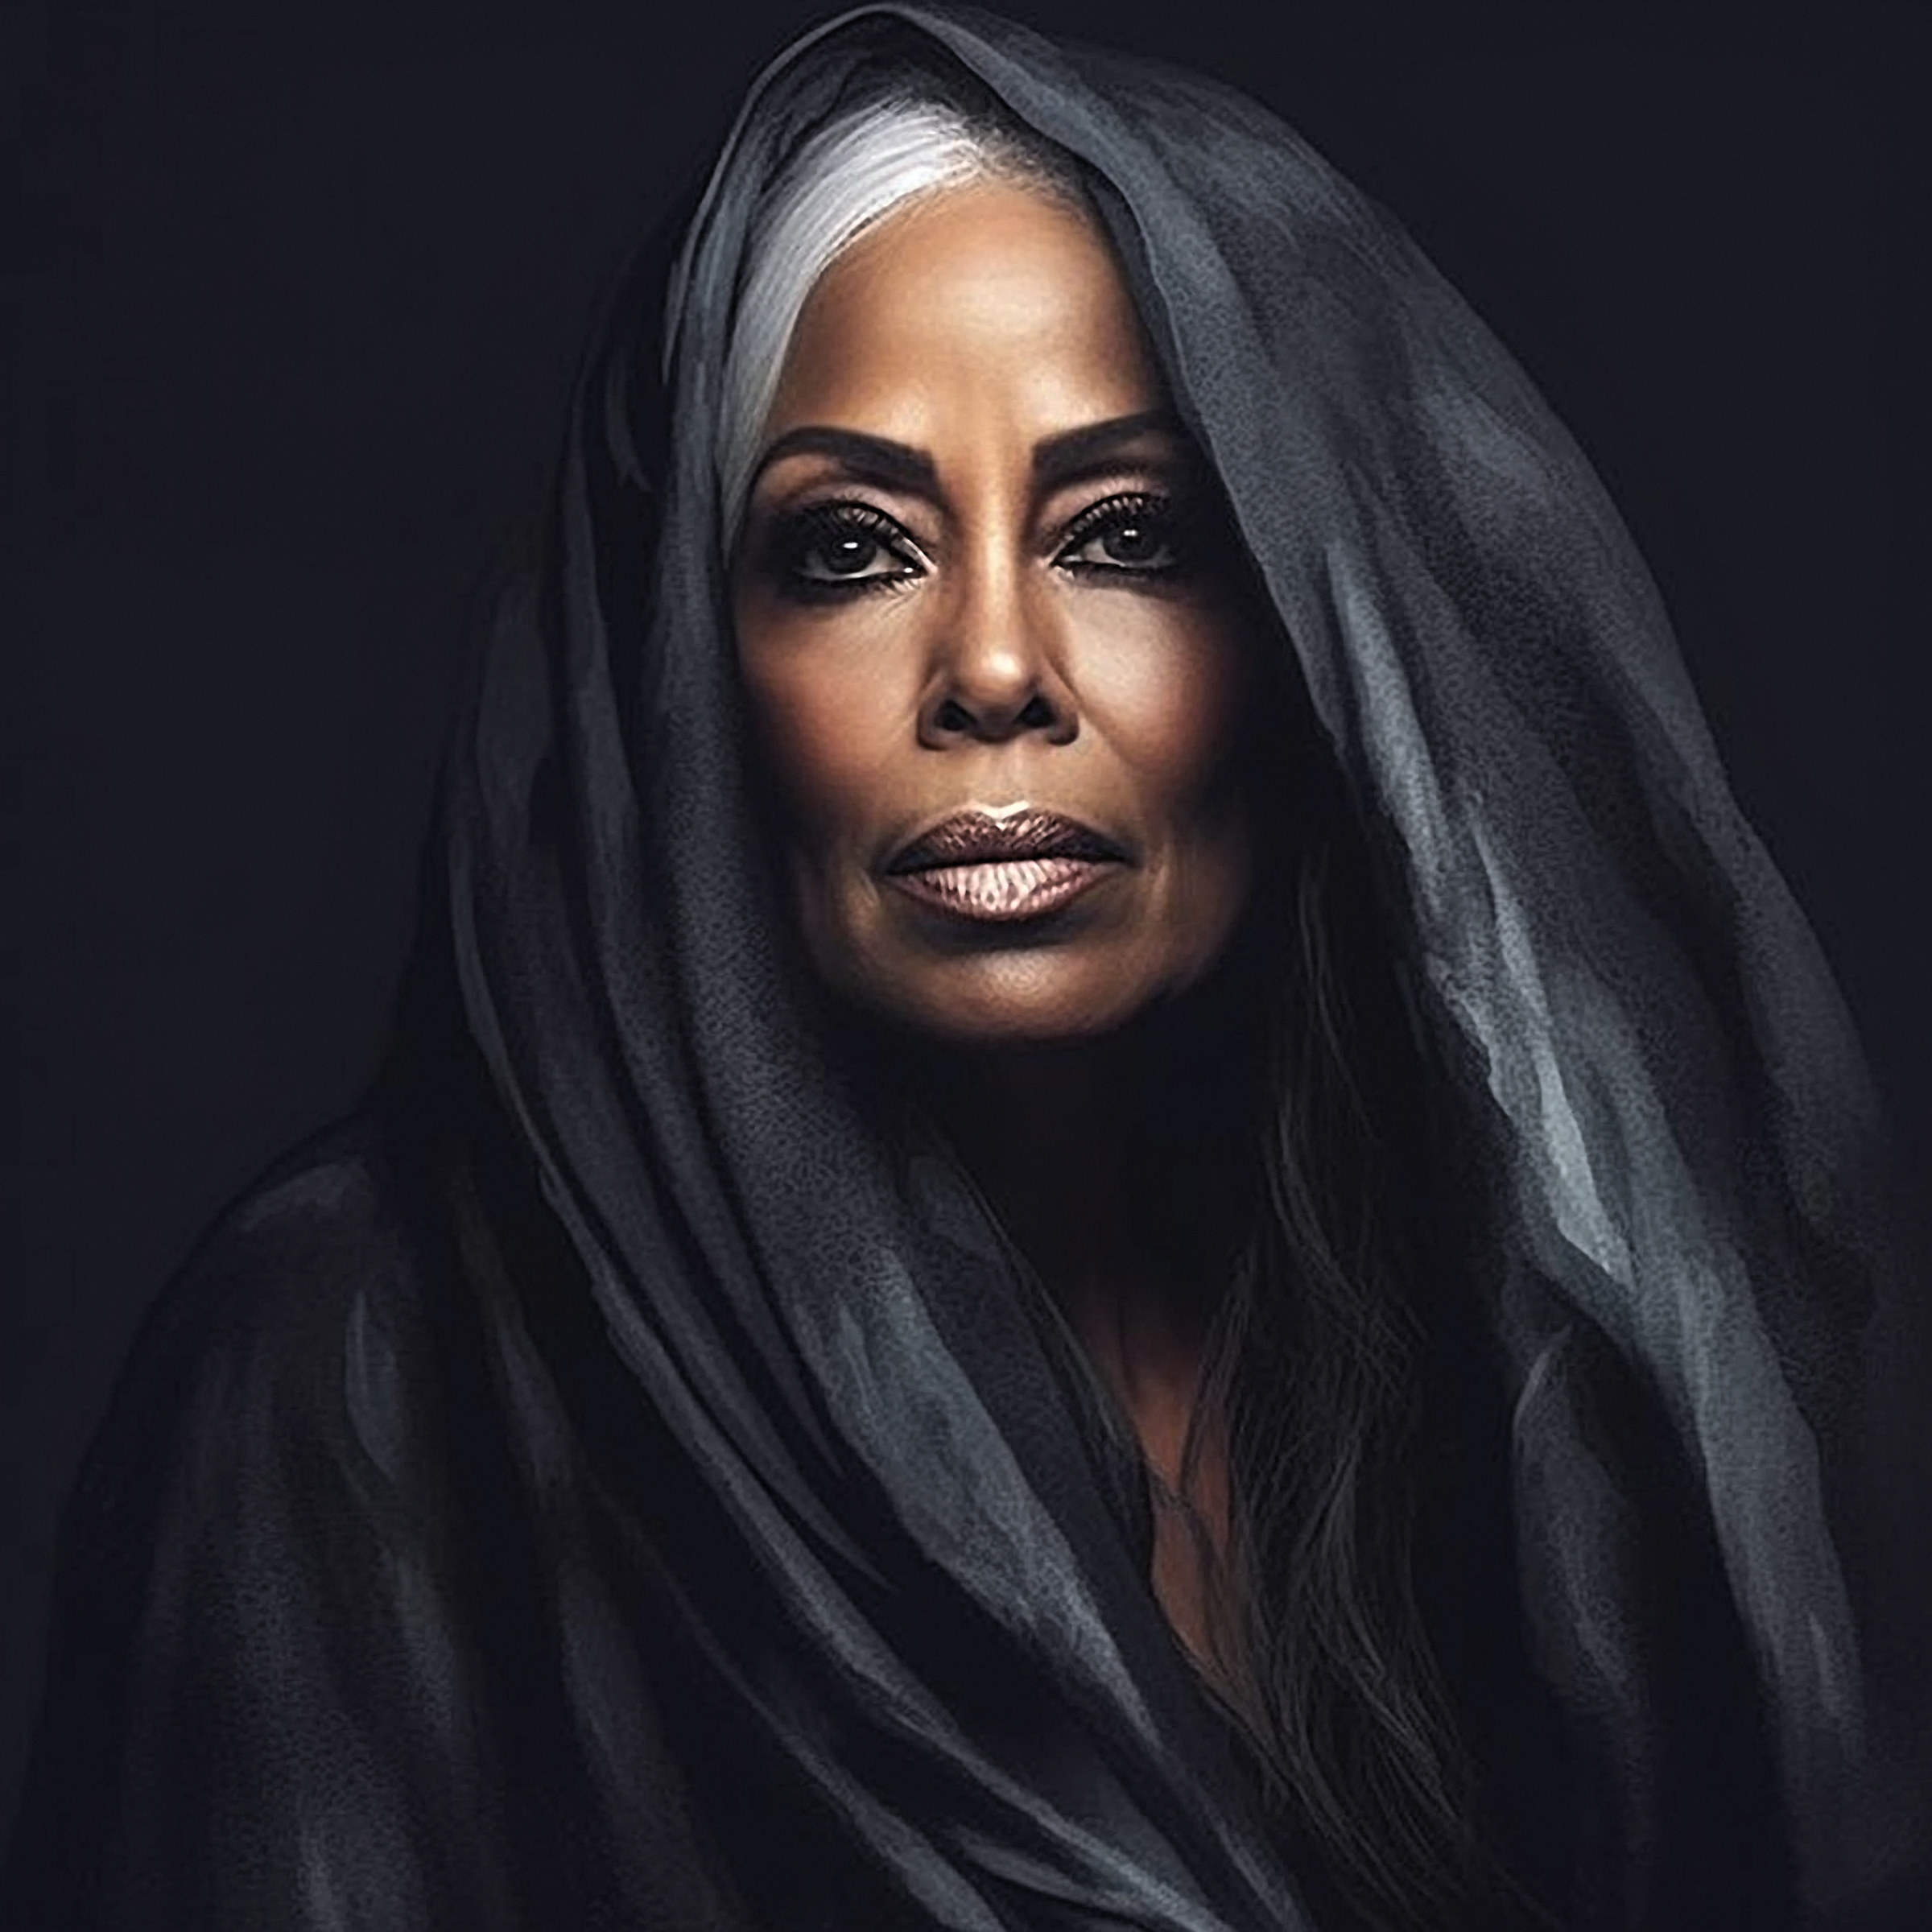 Aaliyah imagined as an older person